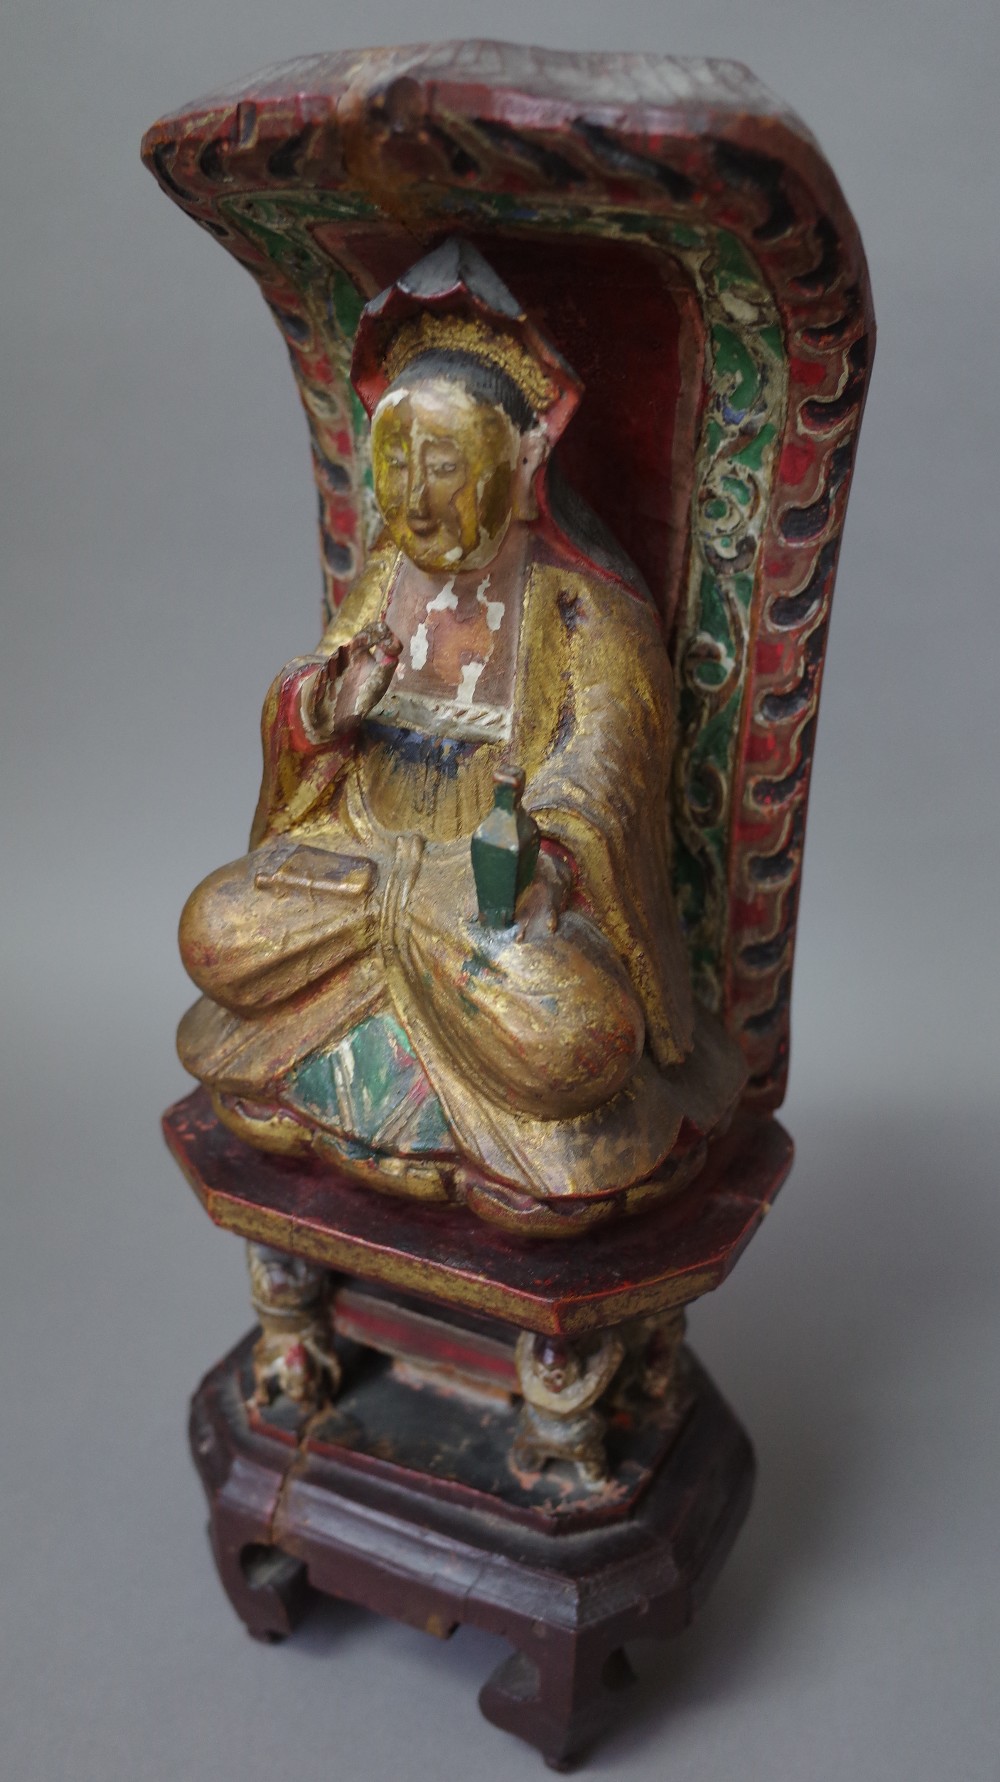 A Chinese polychrome carved wooden Buddha figure, late 19th century,